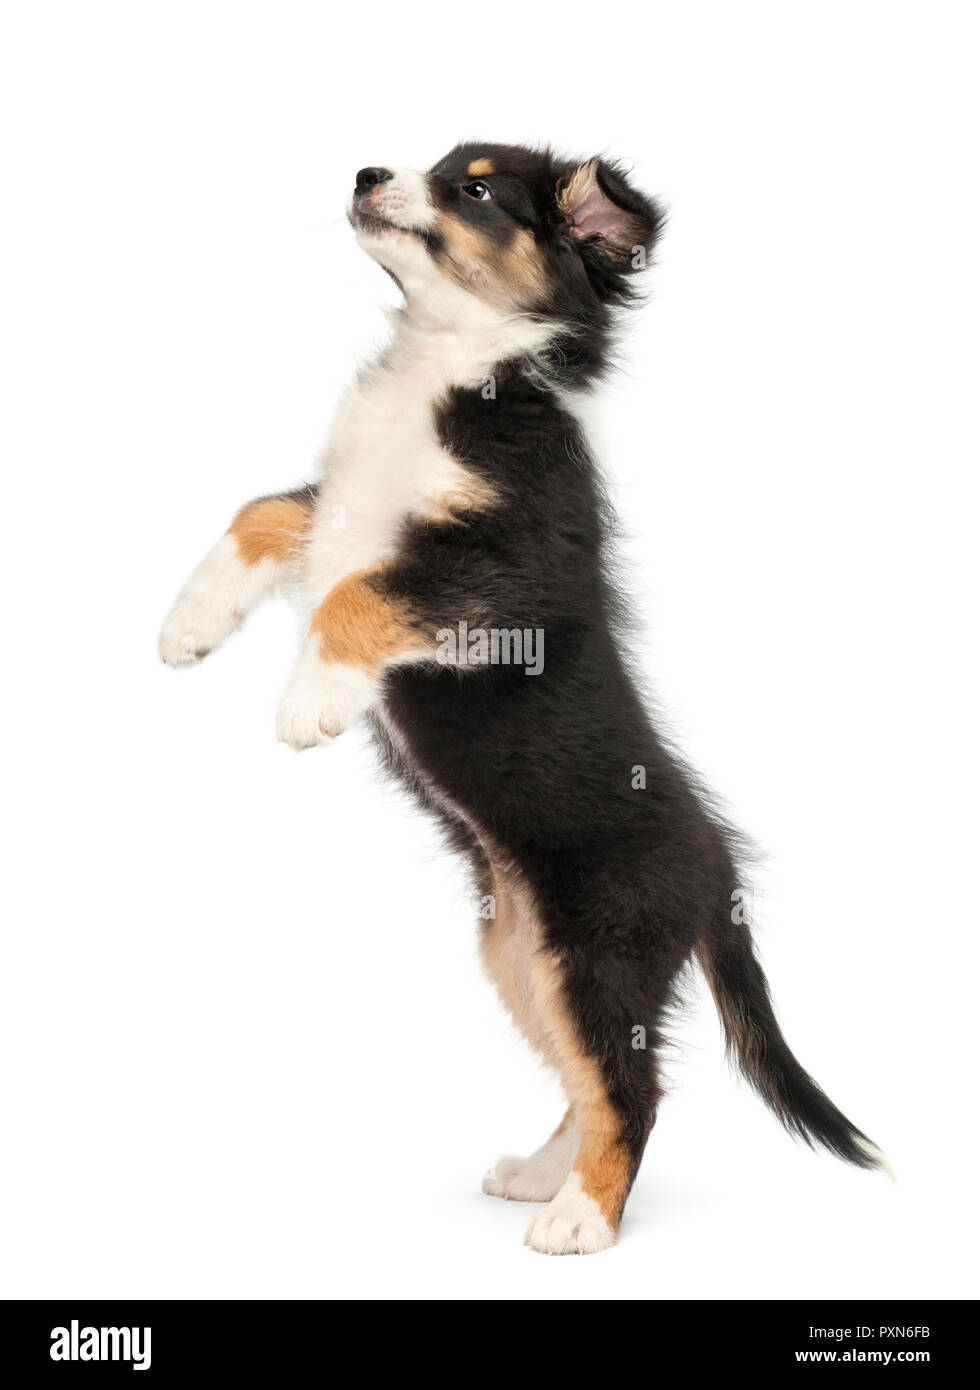 Side view of an Australian Shepherd puppy, 2 months old, standing on hind legs against white background Stock Photo